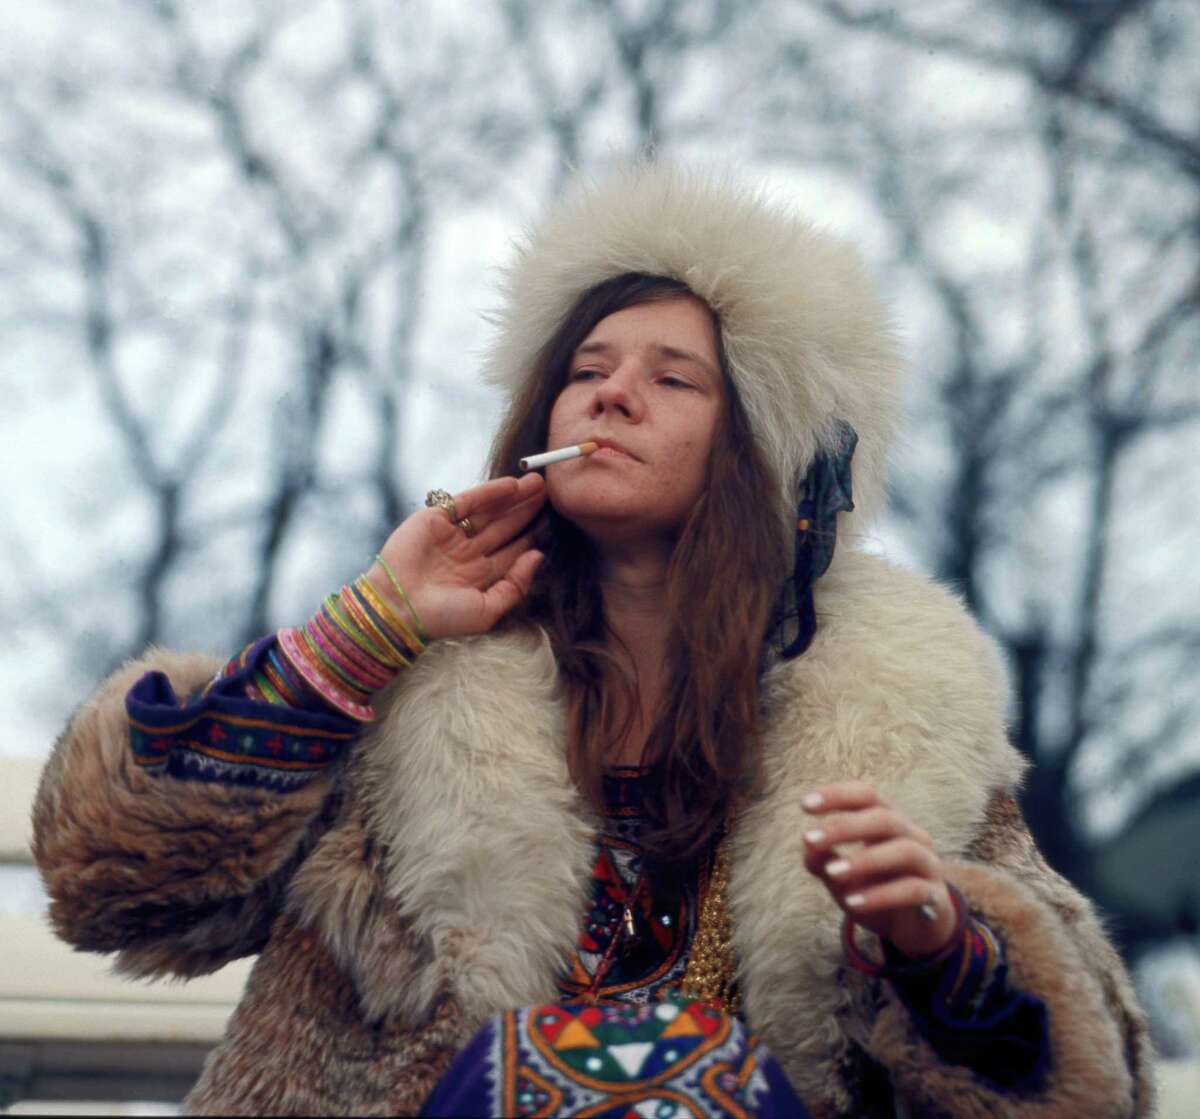 Music powerhouse Janis Joplin, seen here in Denmark, is the subject of a new documentary which will be screened at the Danbury Palace on Sunday, March 13.